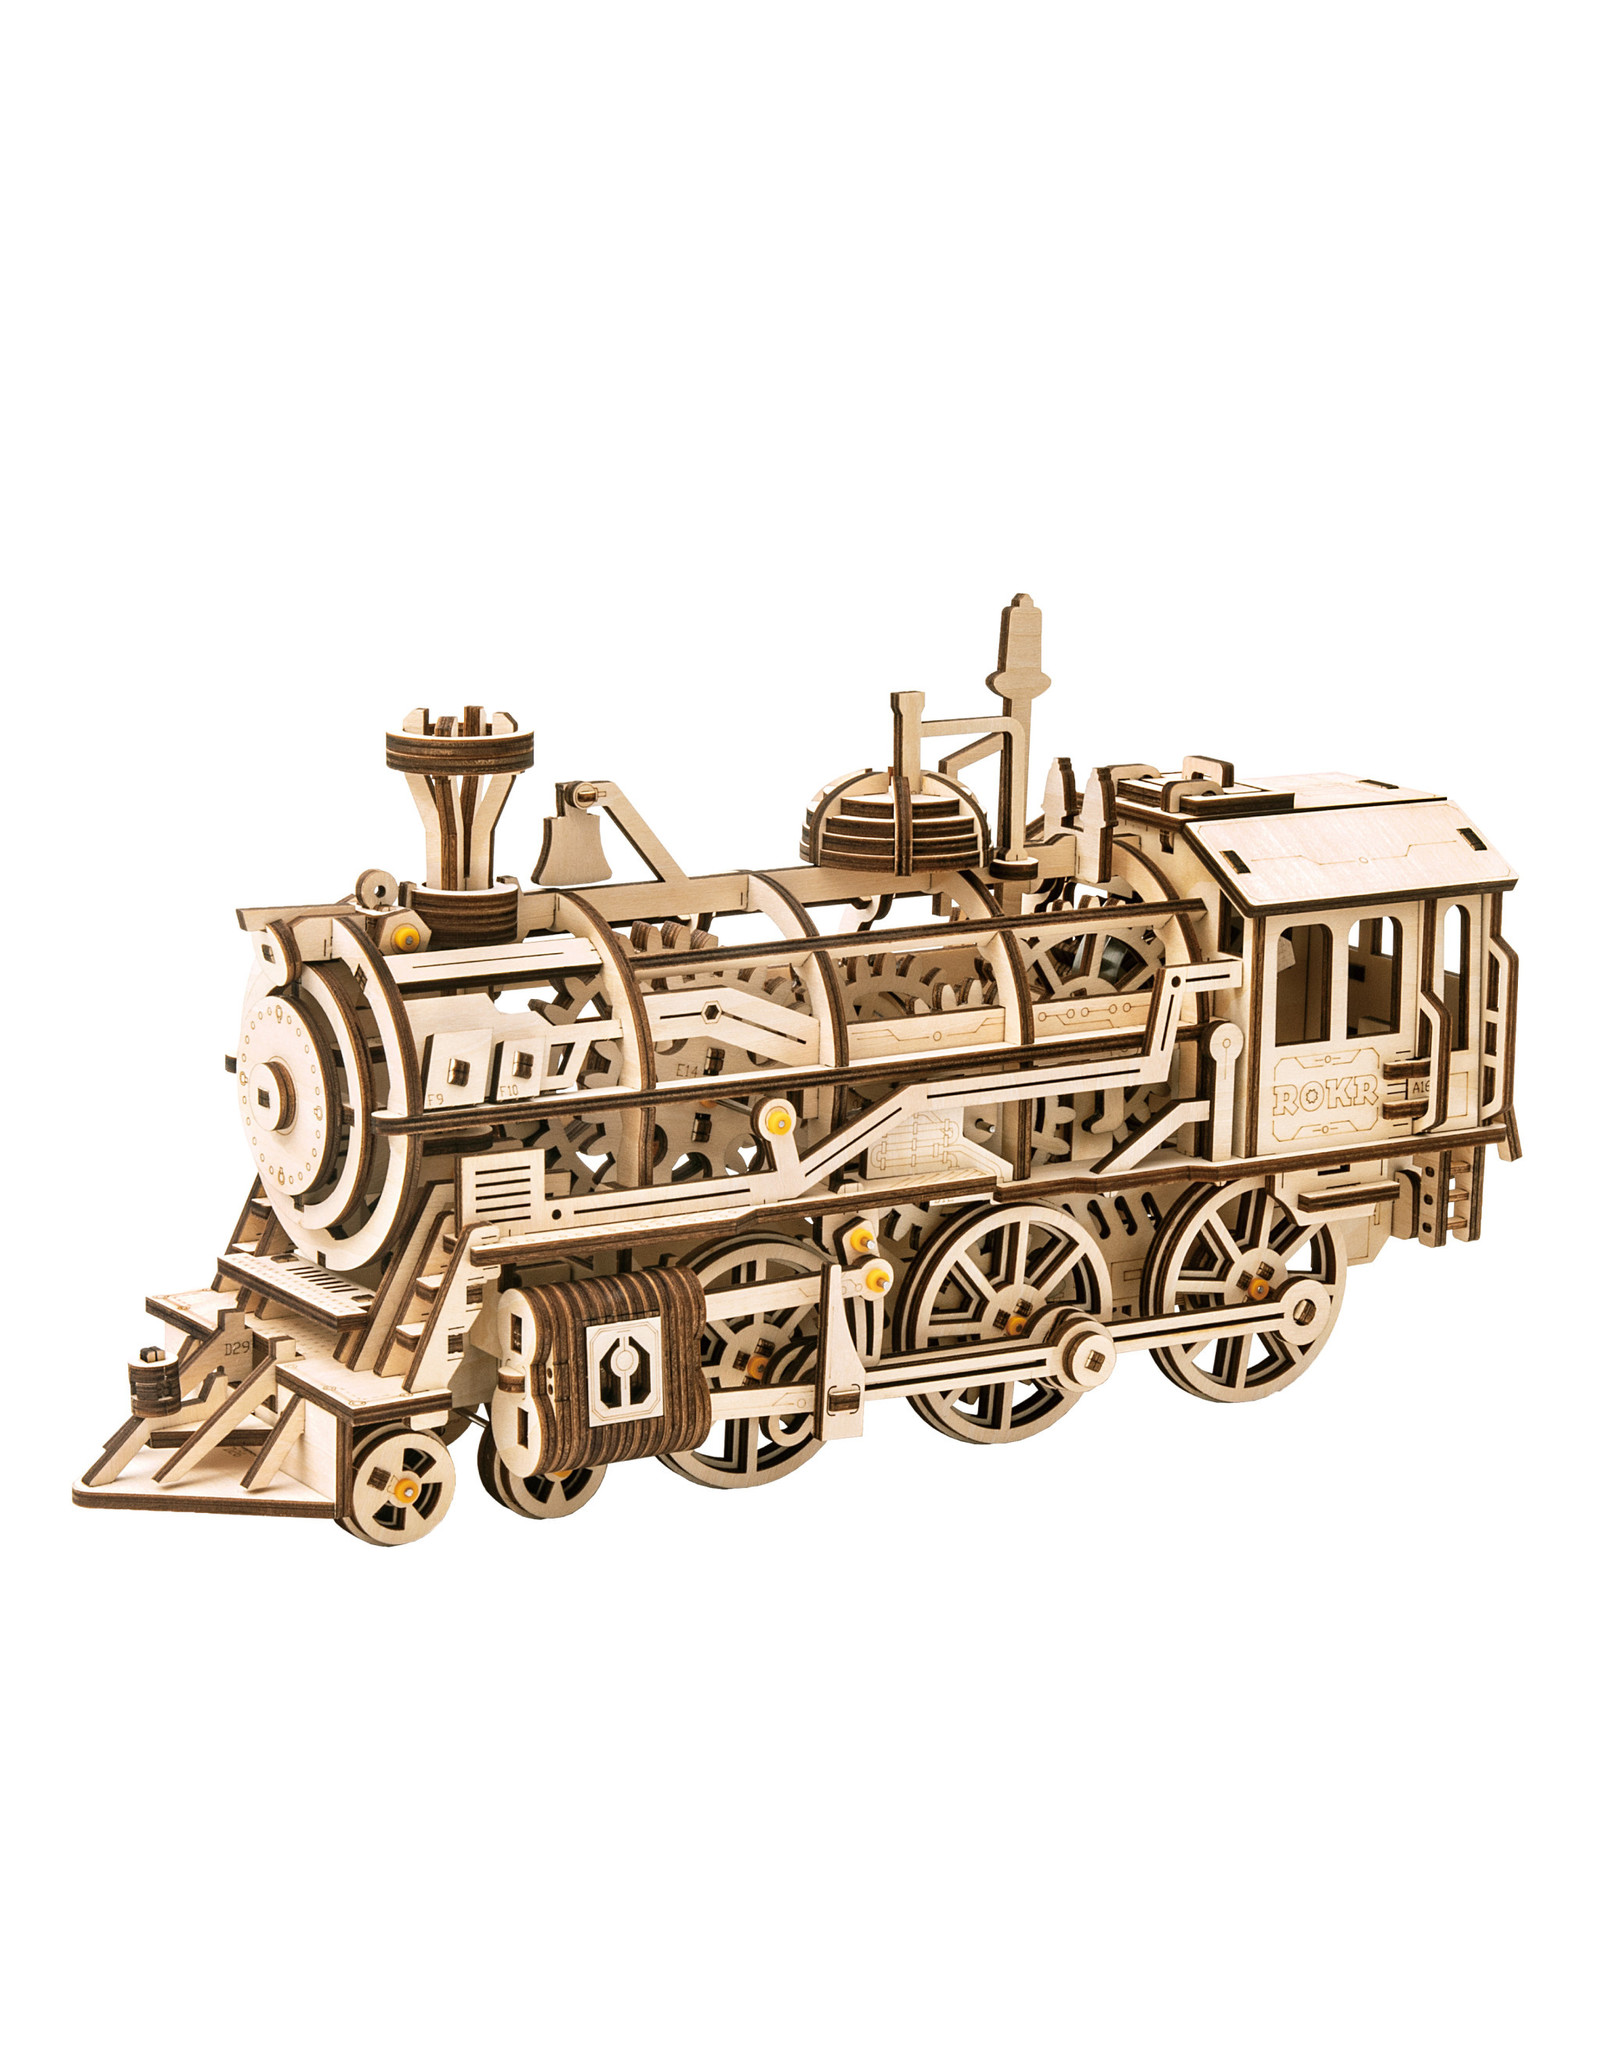 Rokr Locomotive Steam Train Mechanical Gears LK701 3D Wooden Puzzle NEW  SEALED